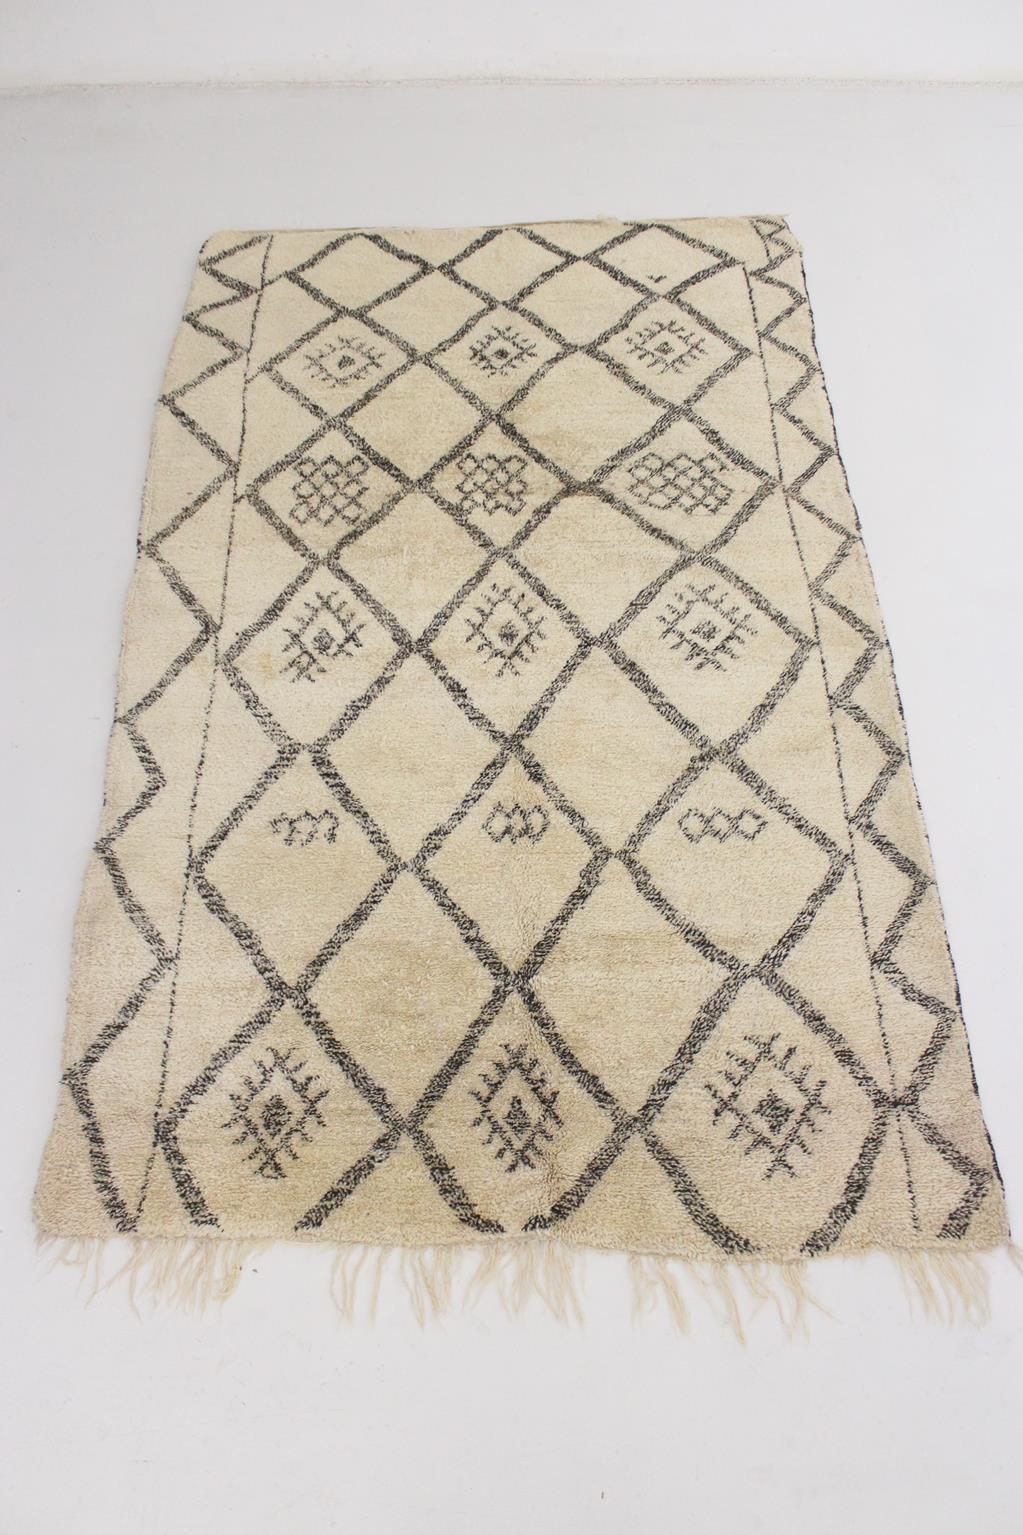 I selected this rug from piles of carpets as I have always loved a neutral, vintage Beni Ourain rug with diamonds pattern! This one has a great texture: it is quite thick and at the same time I've never seen a vintage Beni Ourain rug made with such